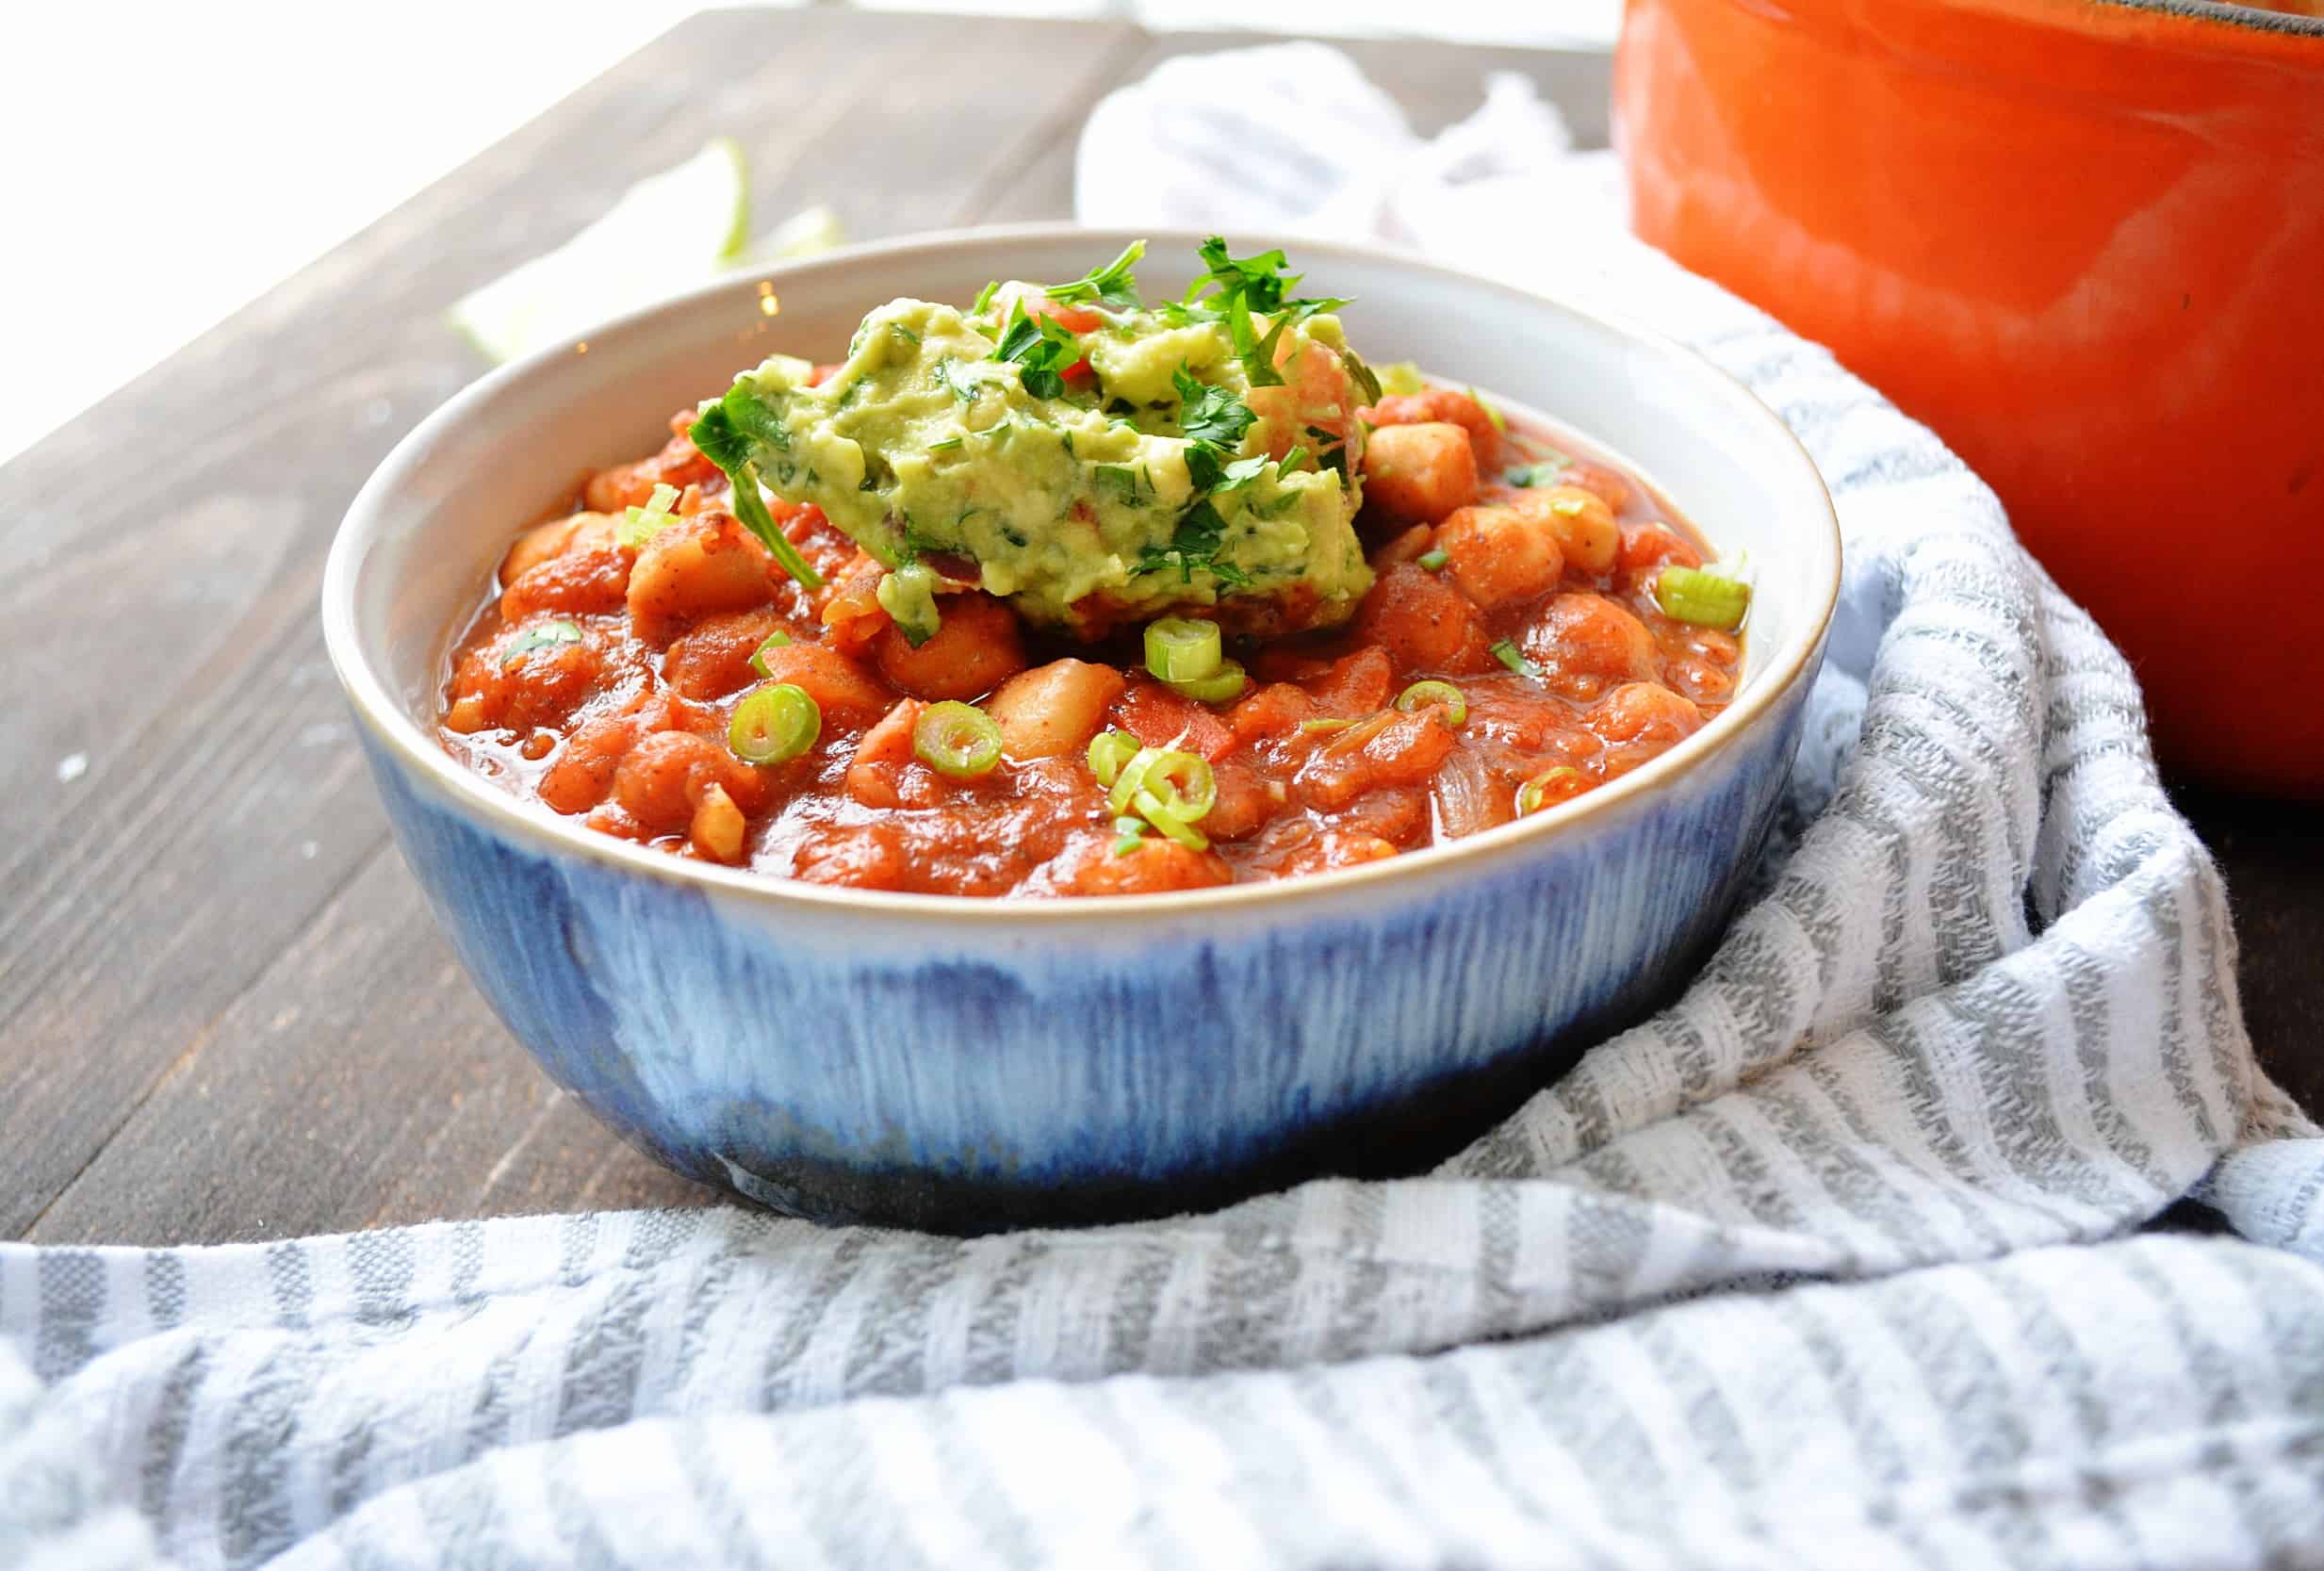 Chickpea and Pinto Bean Chili